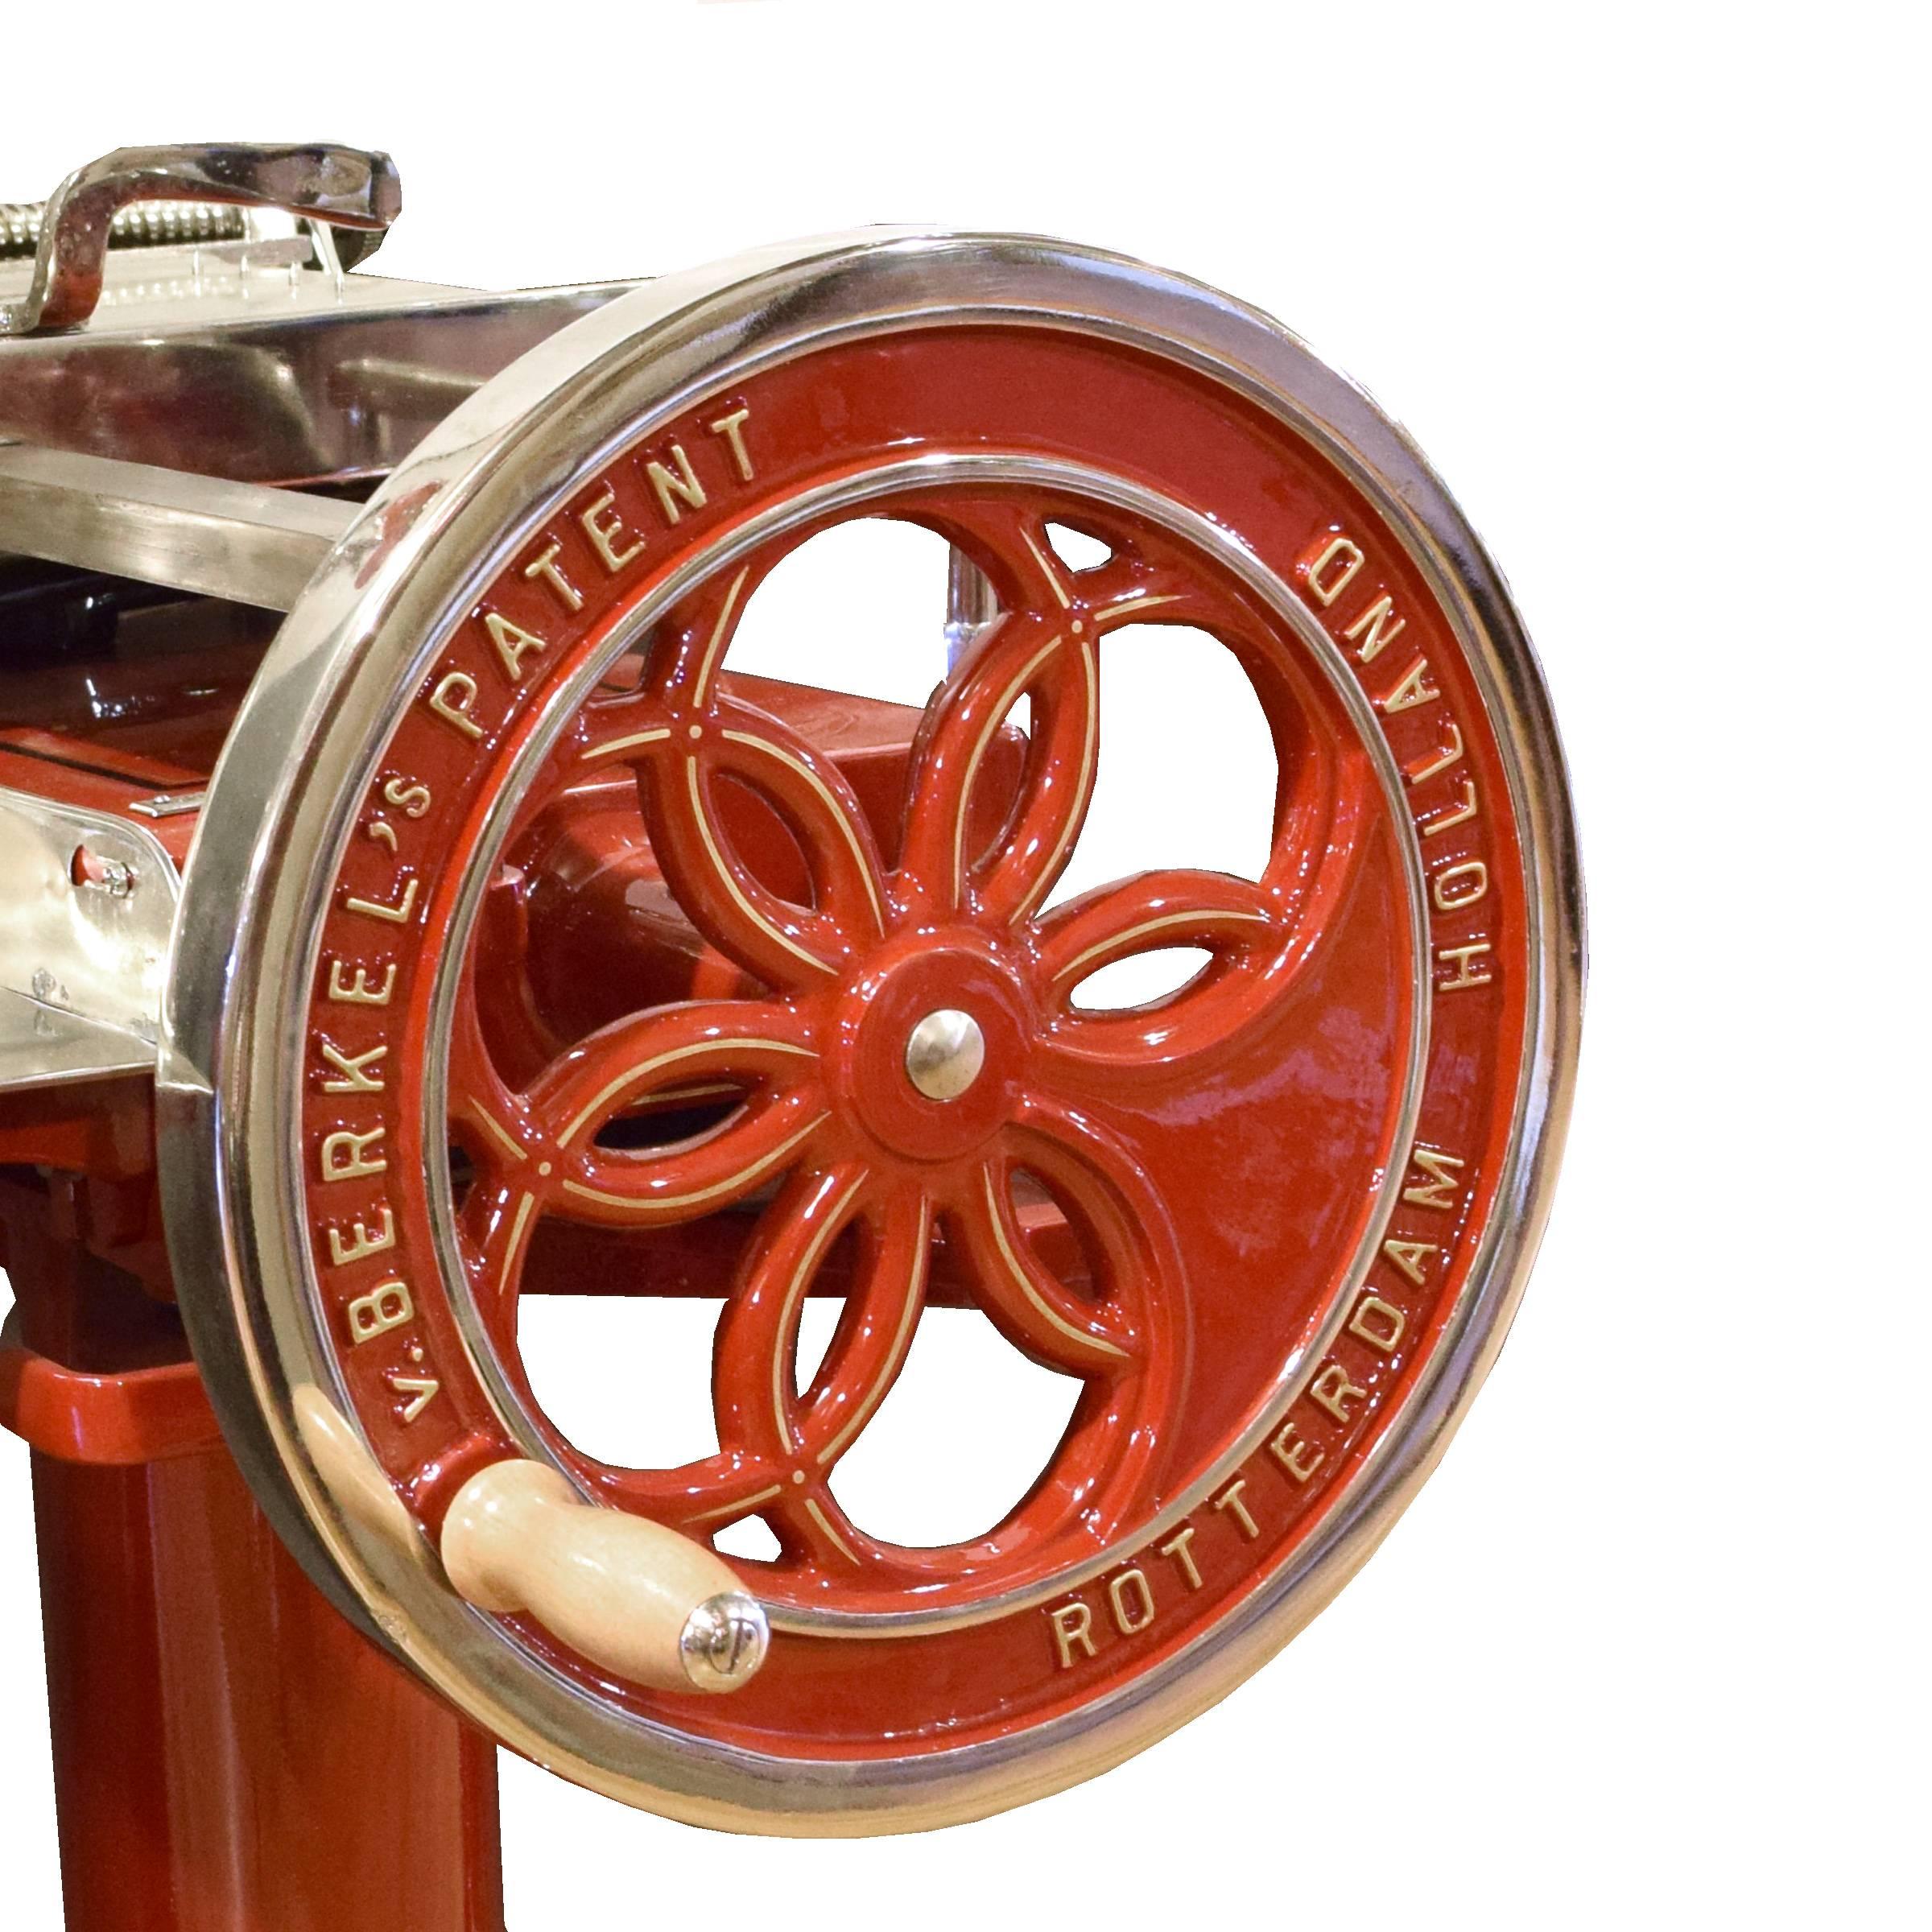 A rare Berkel Model 1 slicing machine in a high gloss red enamel with gold pinstriping, manufactured in Rotterdam, Holland. This model, made from 1908-1915, was revolutionary for its time and is thus the most coveted of the rare Berkel models. It is